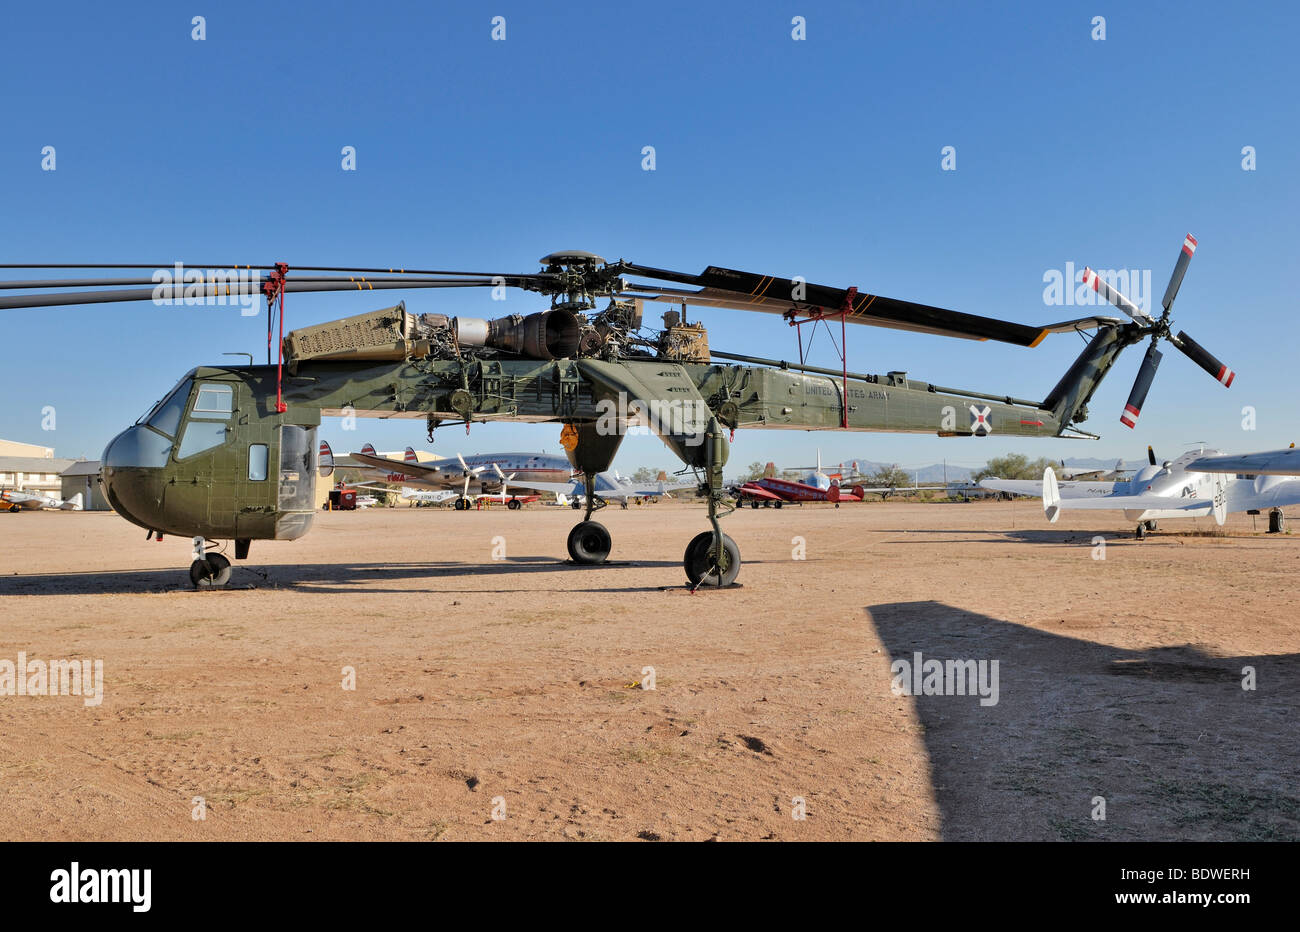 Cargo helicopter, Sikorsky CH 54A, skycrane, from 1964, Pima Air and Space Museum, Tucson, Arizona, USA Stock Photo